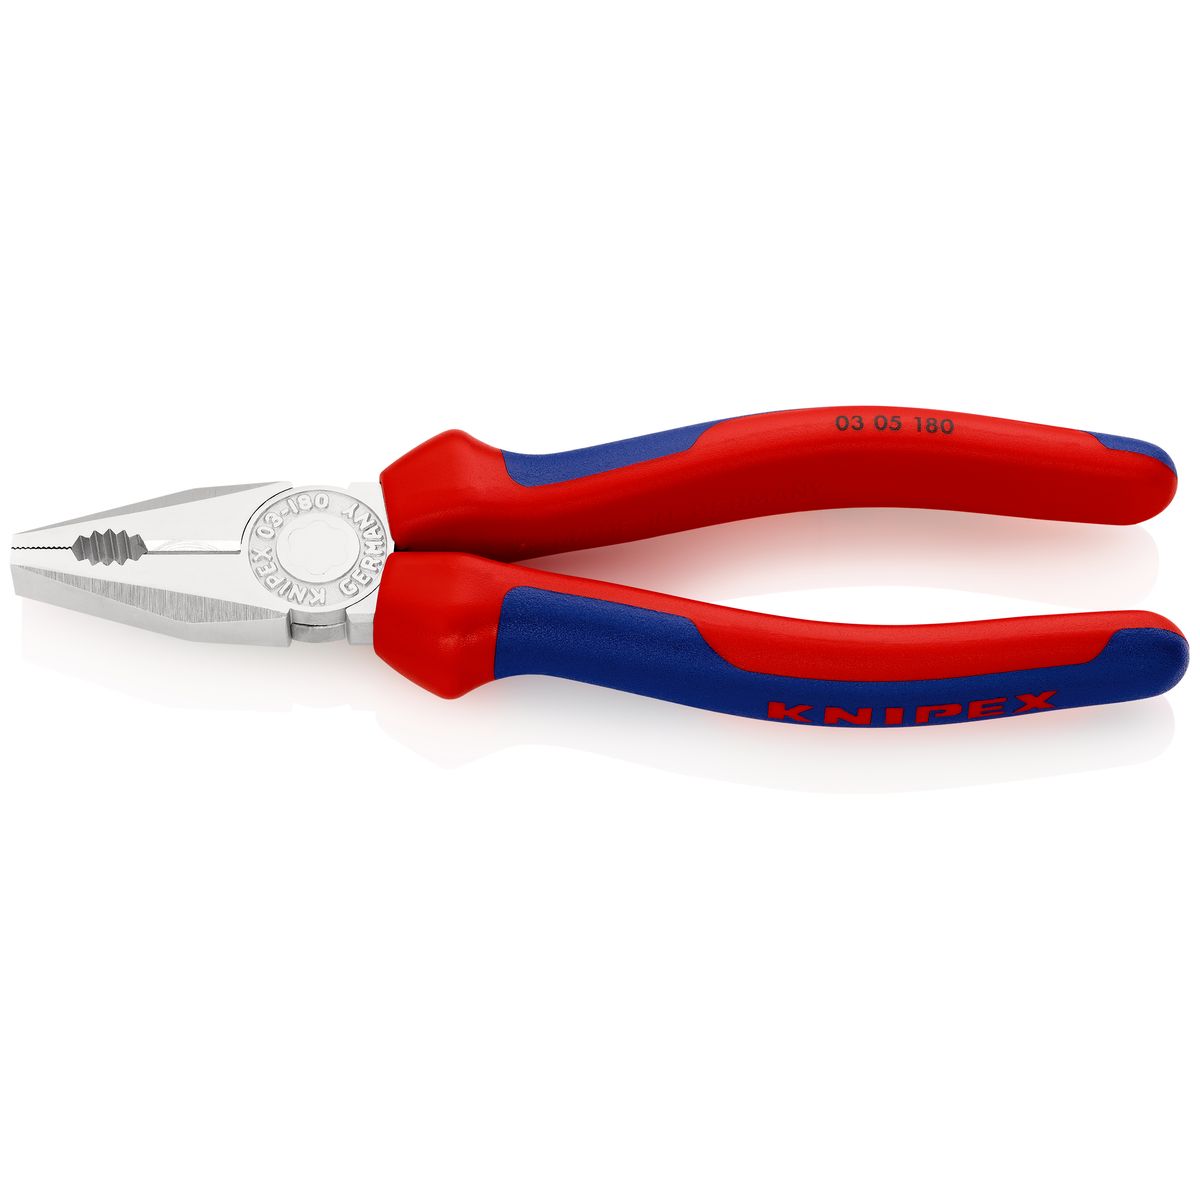 COMBINATION PLIERS 0305180 Knipex